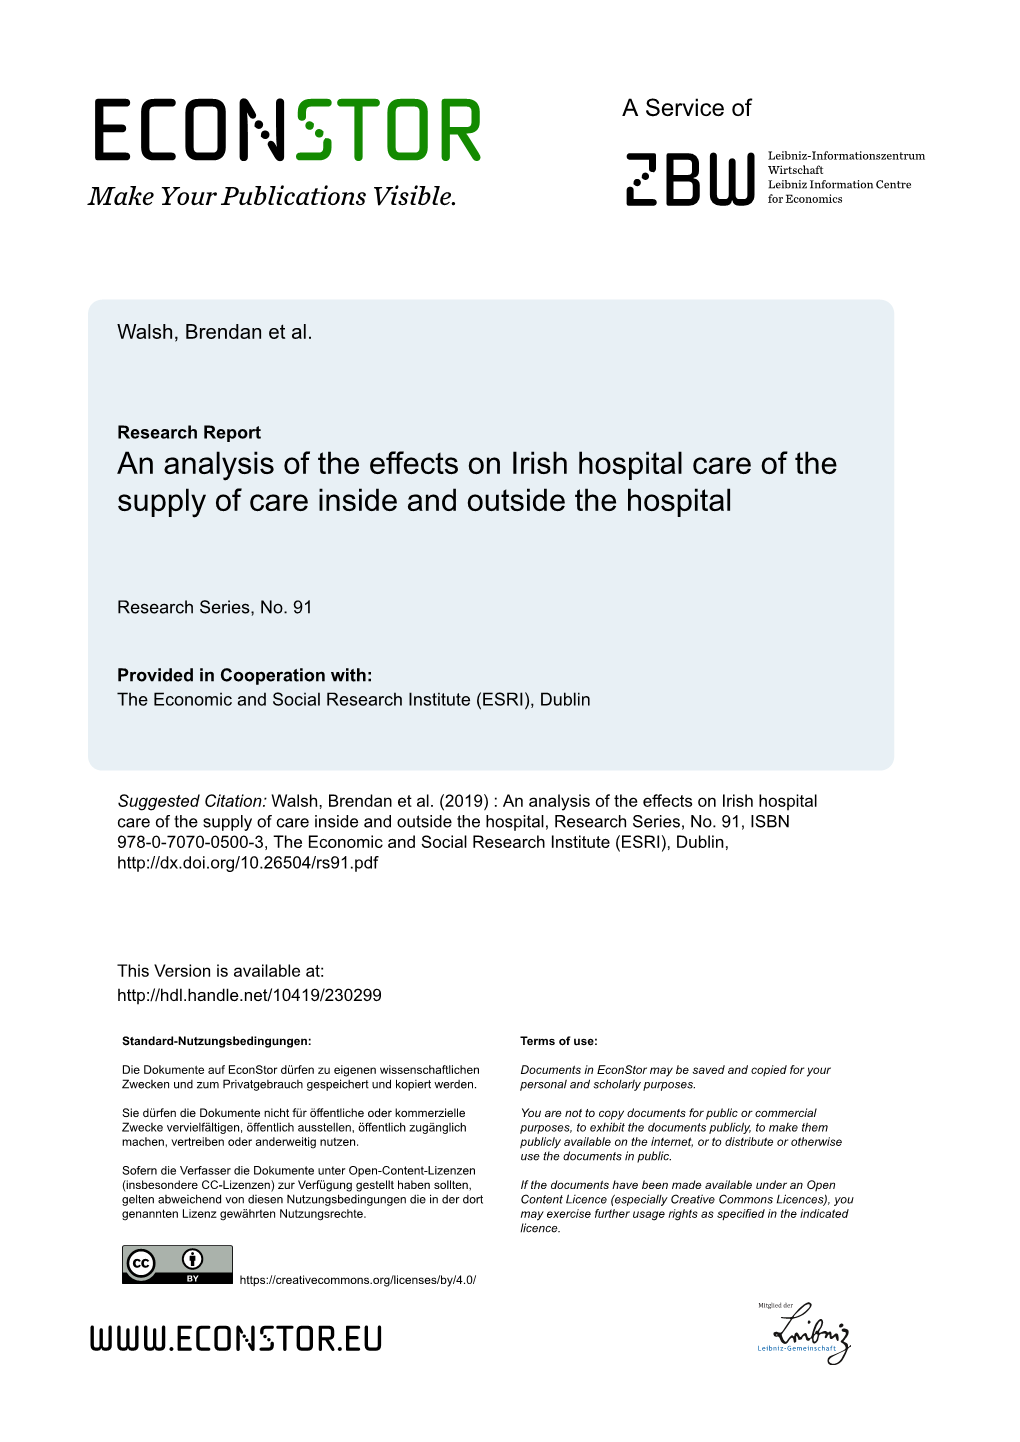 An Analysis of the Effects on Irish Hospital Care of the Supply of Care Inside and Outside the Hospital